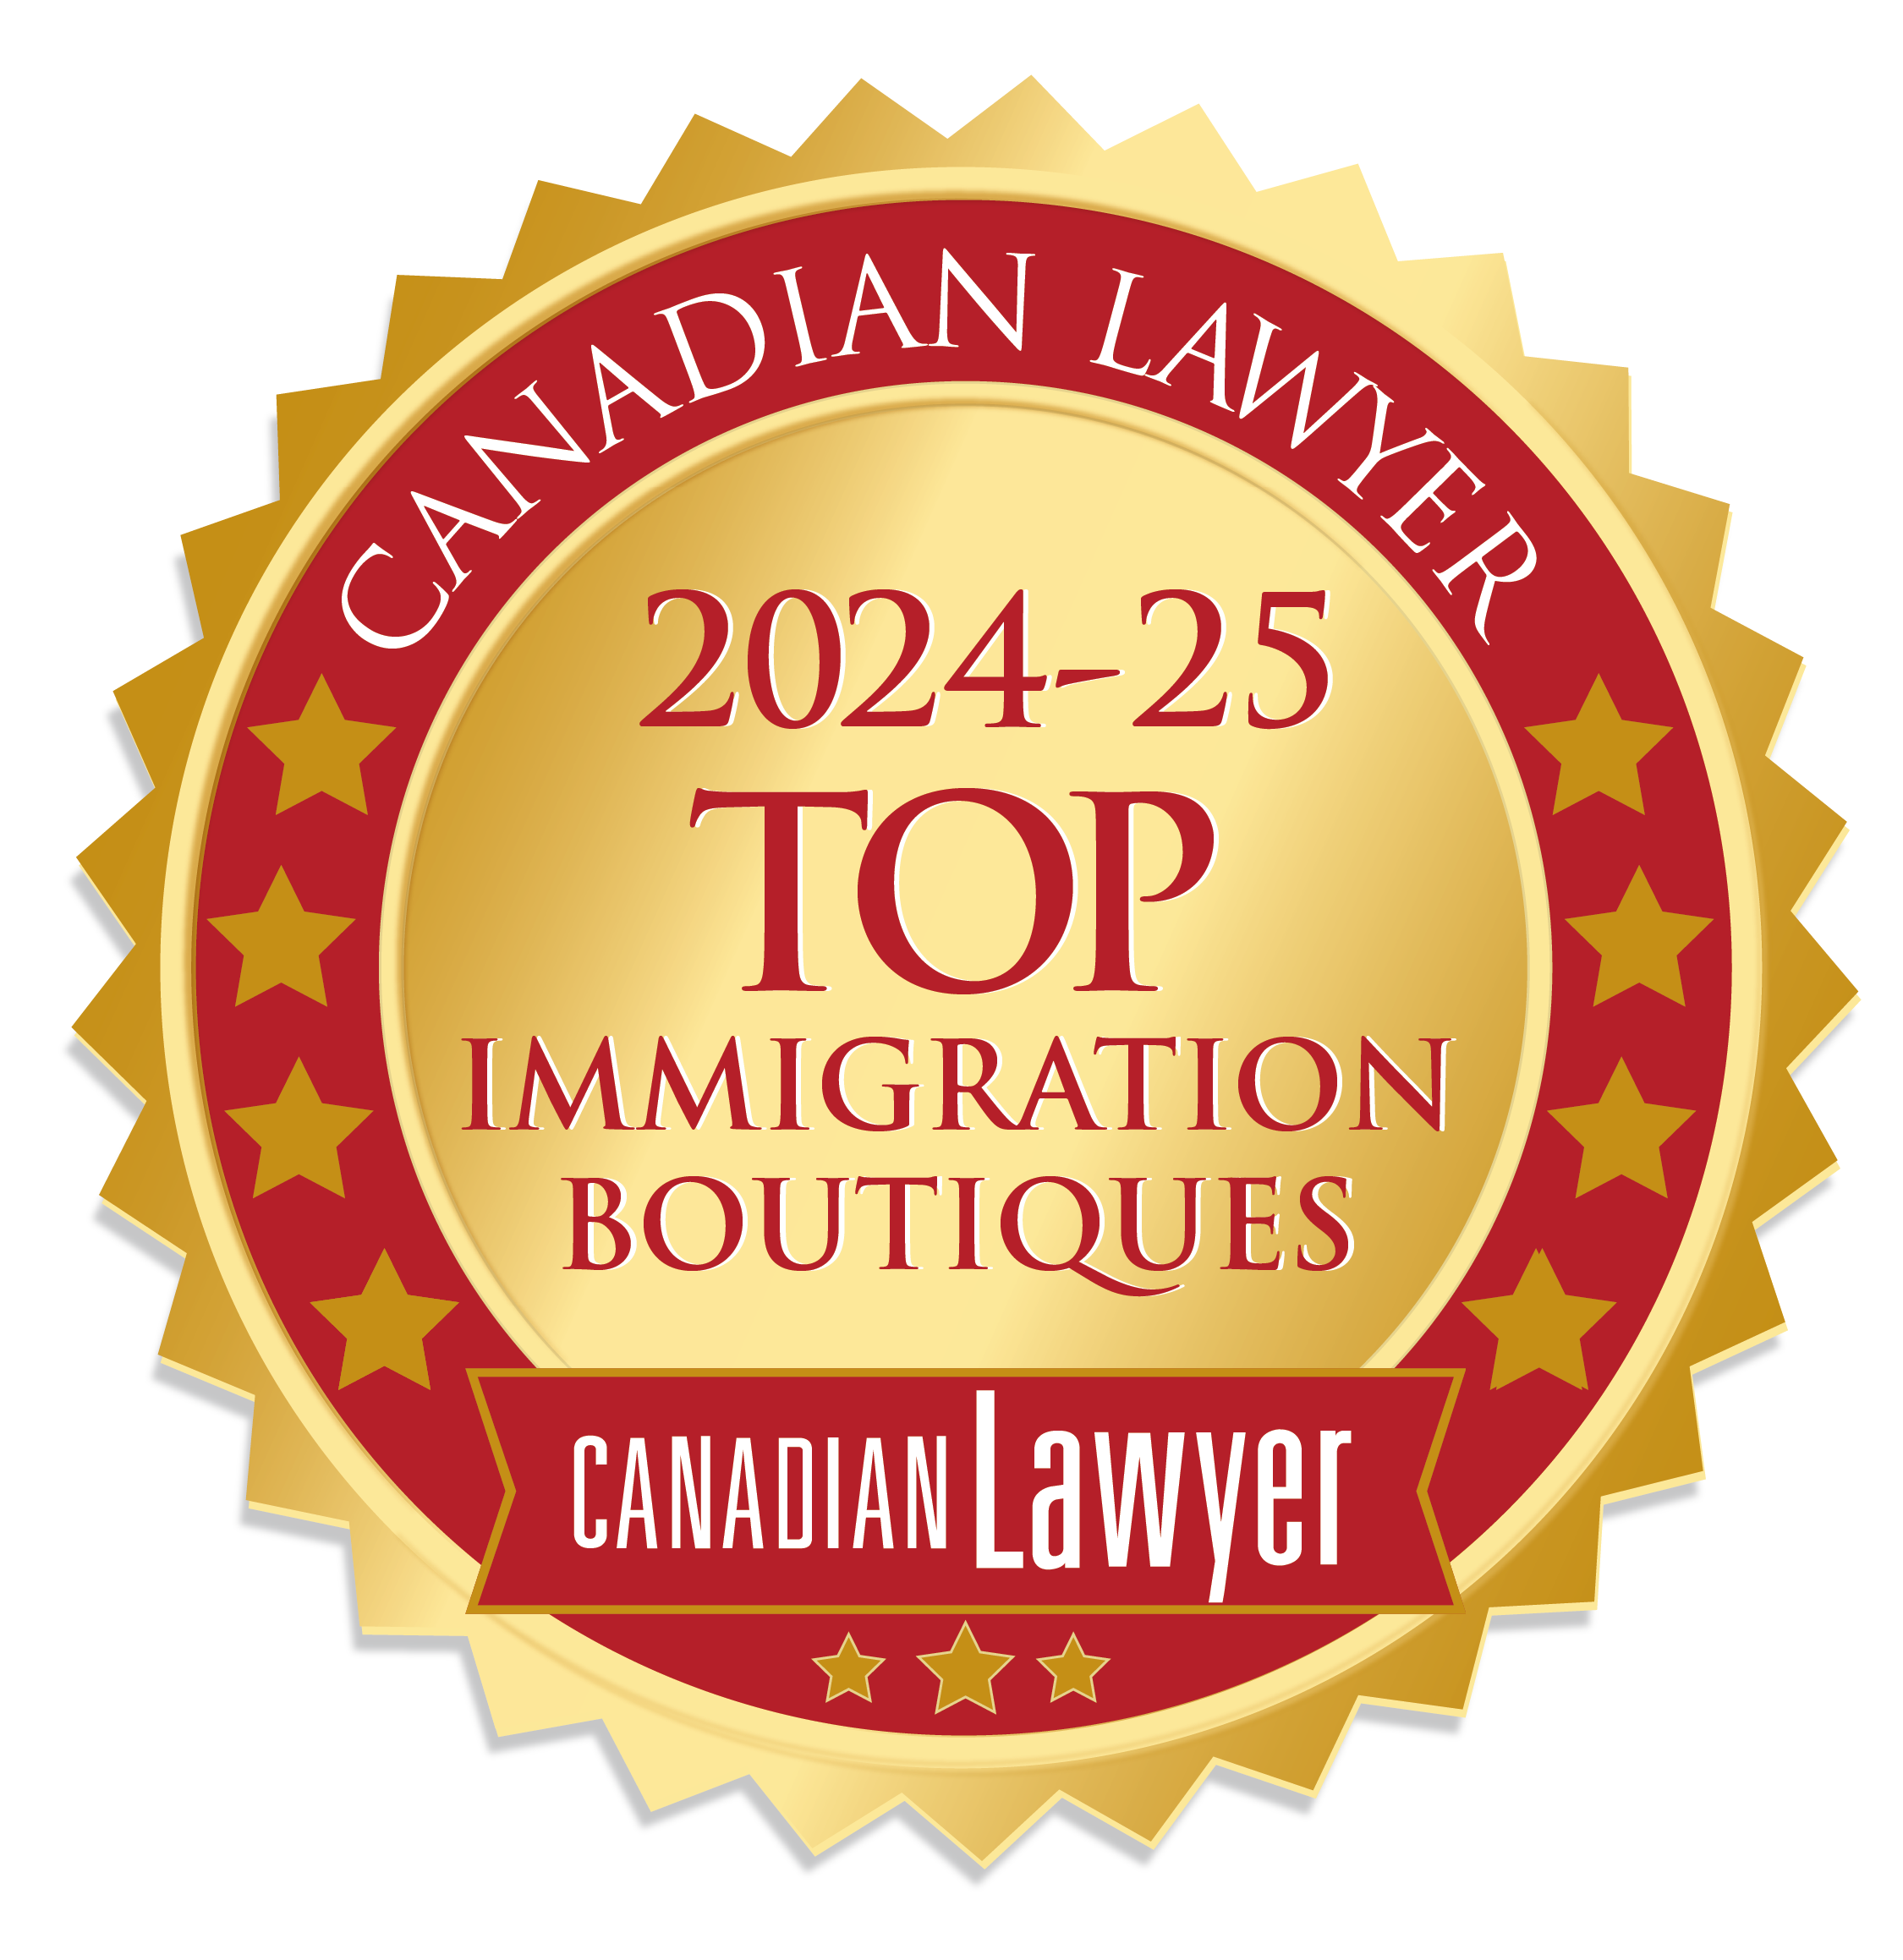 The Best Immigration Law Firms in Canada, Boutique